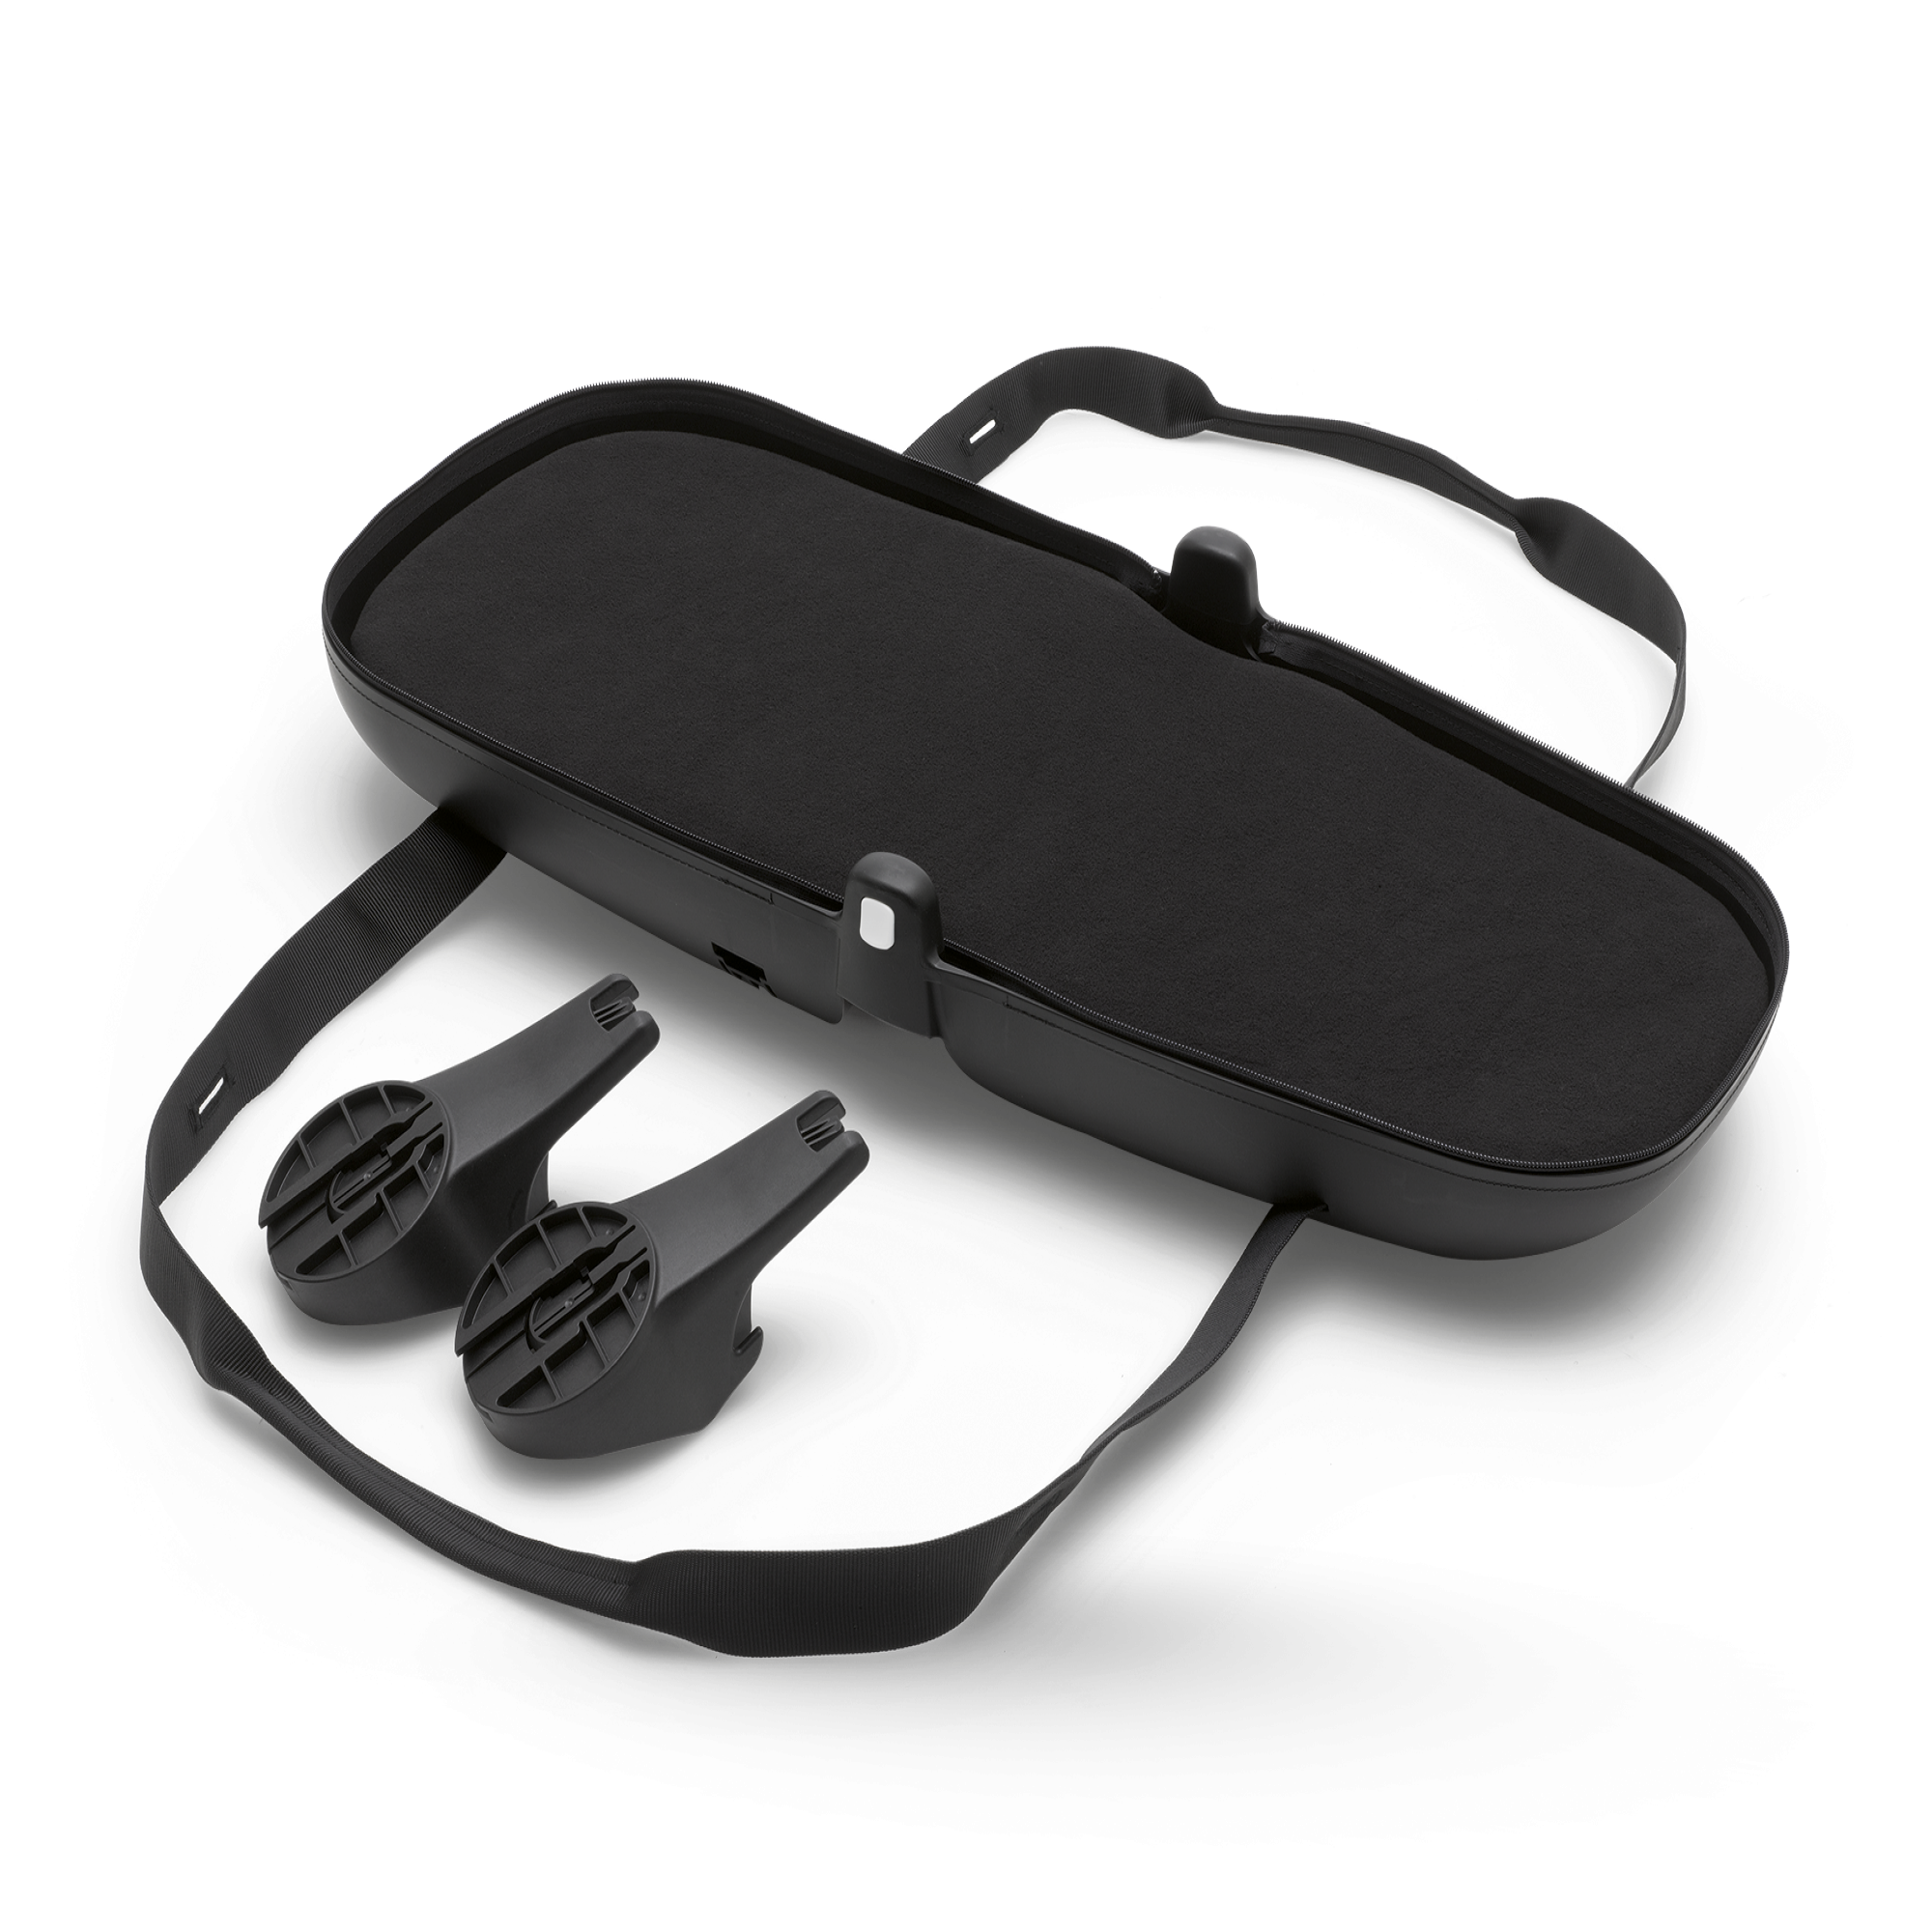 bugaboo bee5 carrycot